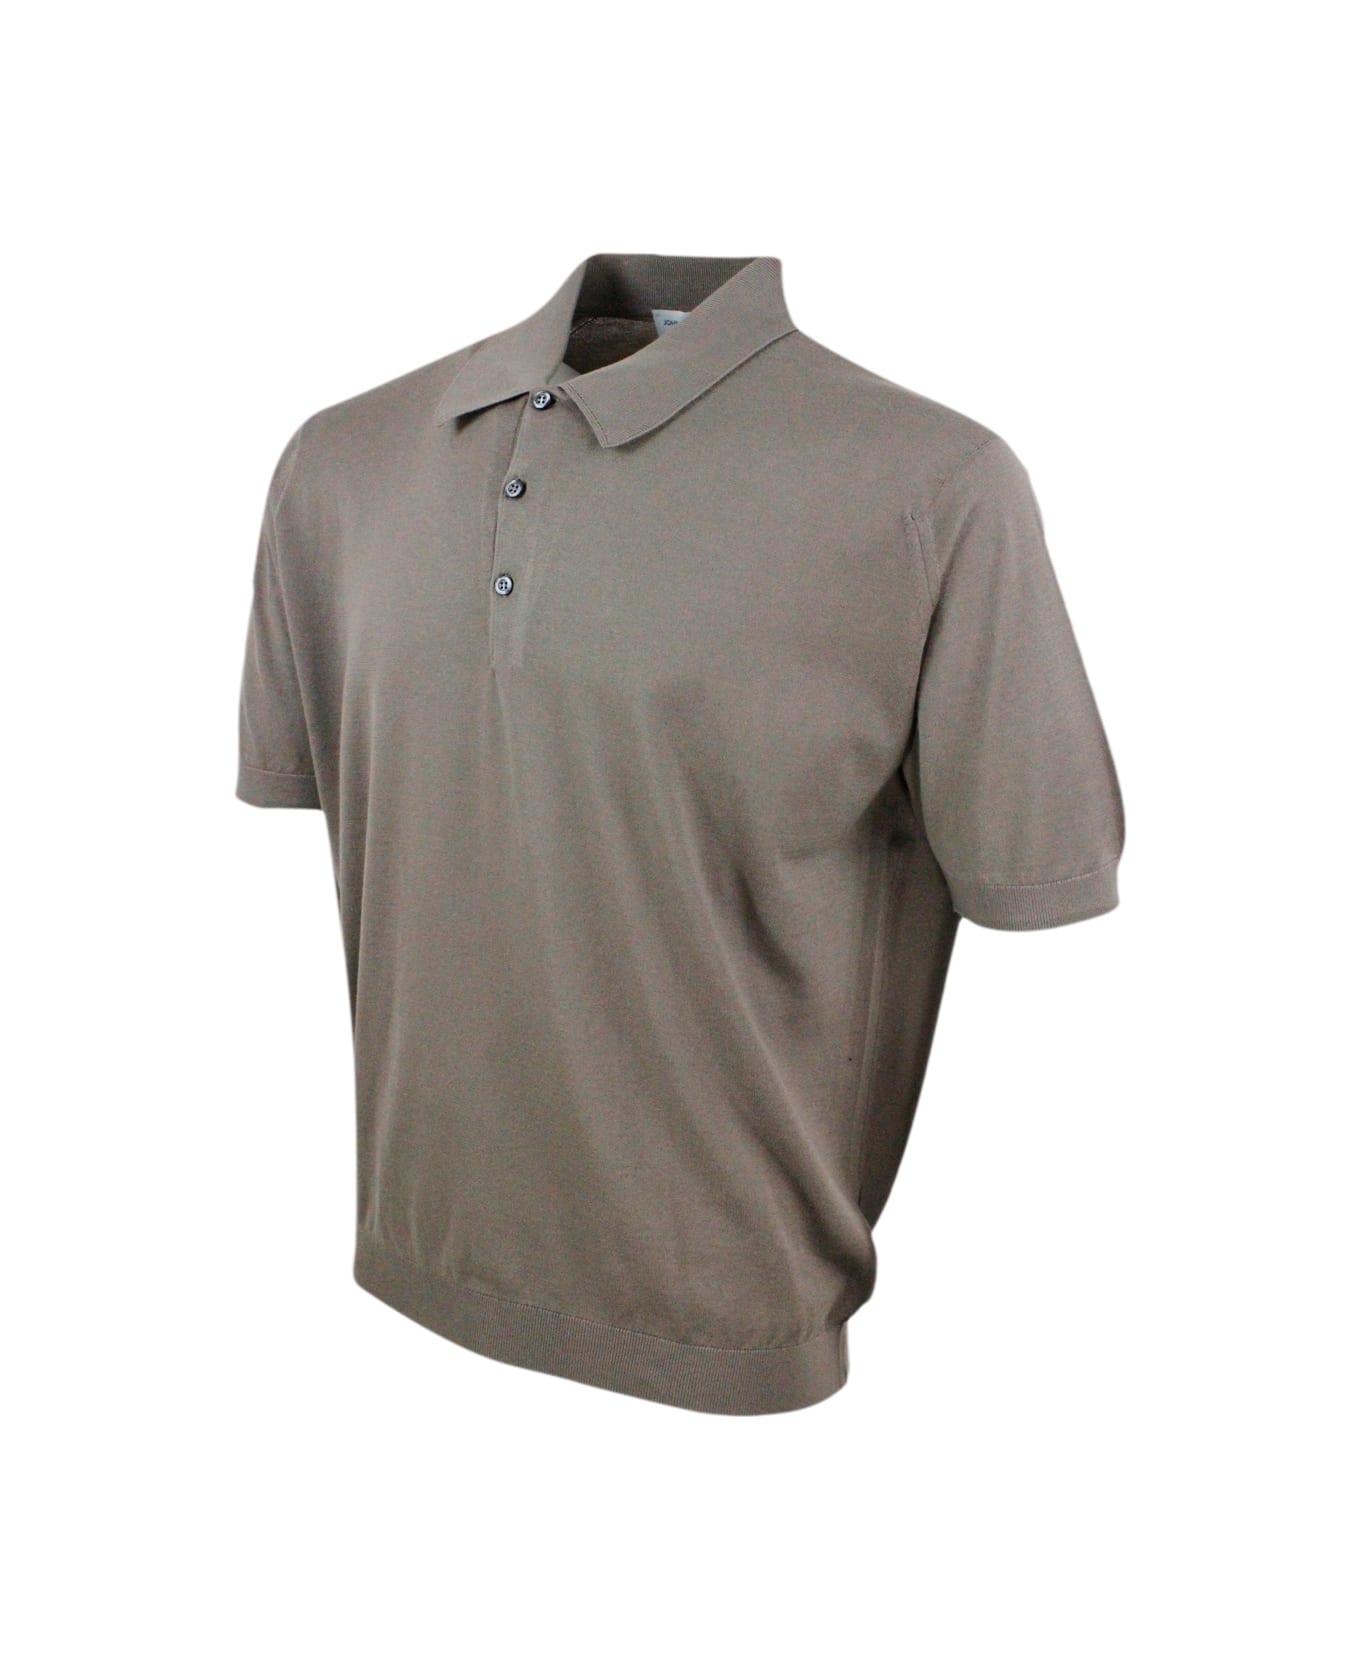 John Smedley Short-sleeved Polo Shirt In Extra-fine Cotton Thread With Three Buttons - Taupe